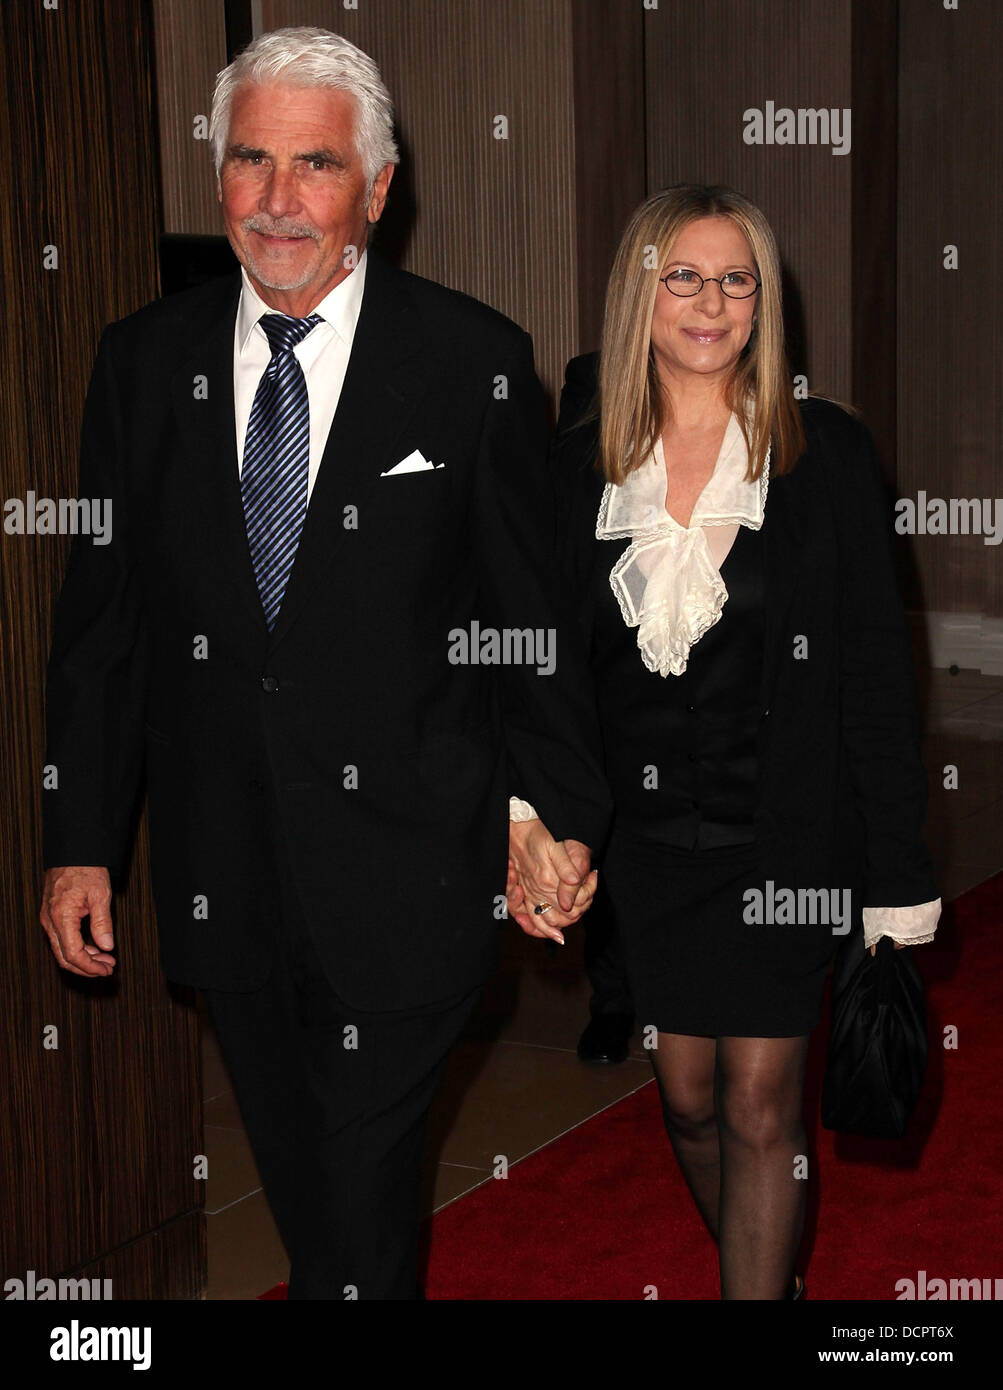 James Brolin and Barbra Streisand Cedars-Sinai Board of Governors to Honor Barbra Streisand and Robert Barth at The Beverly Hilton Hotel Beverly Hills, California - 08.11.11 Stock Photo